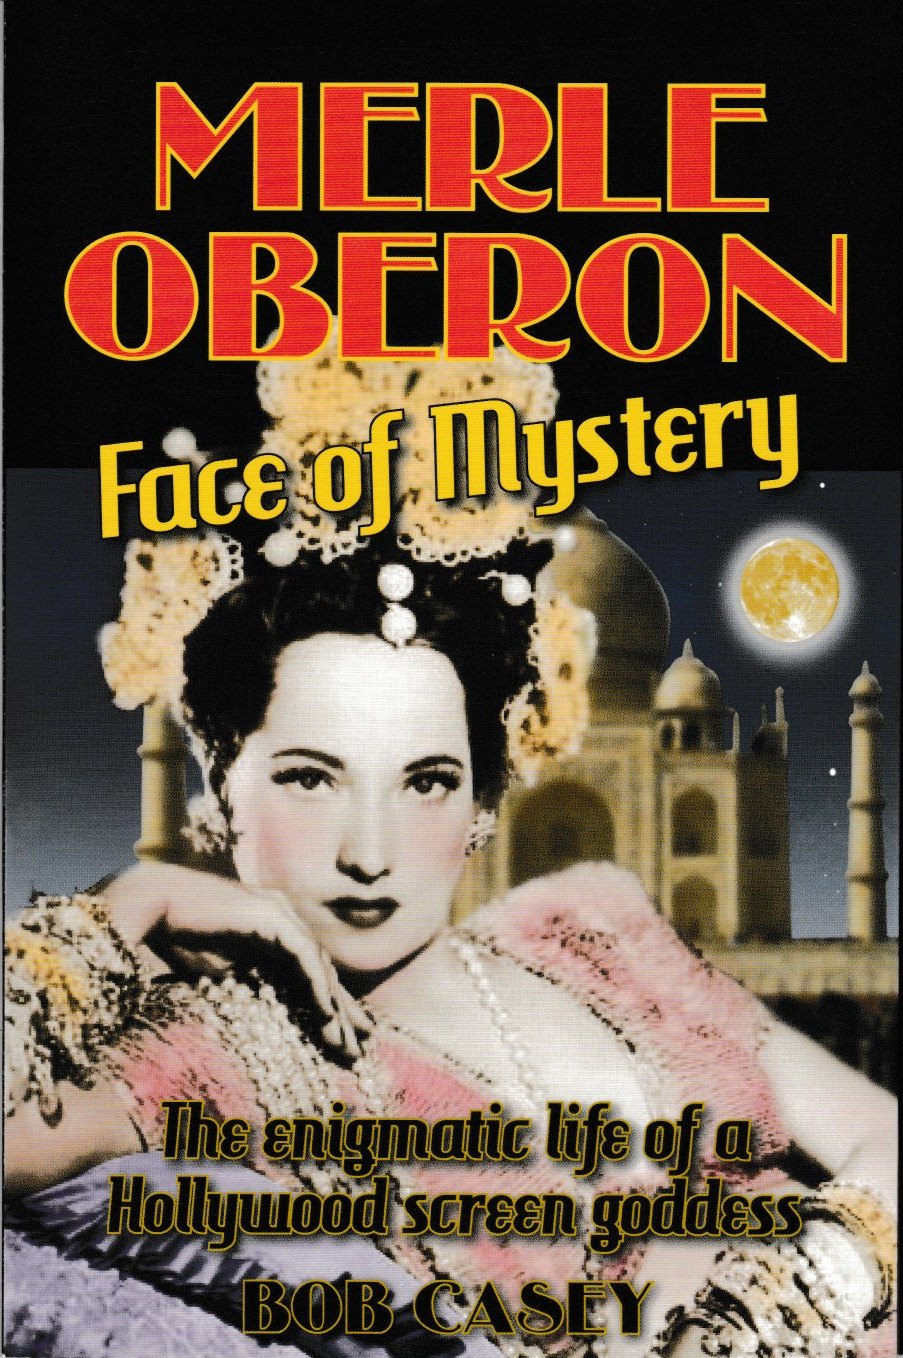 Merle Oberon - Face of Mystery